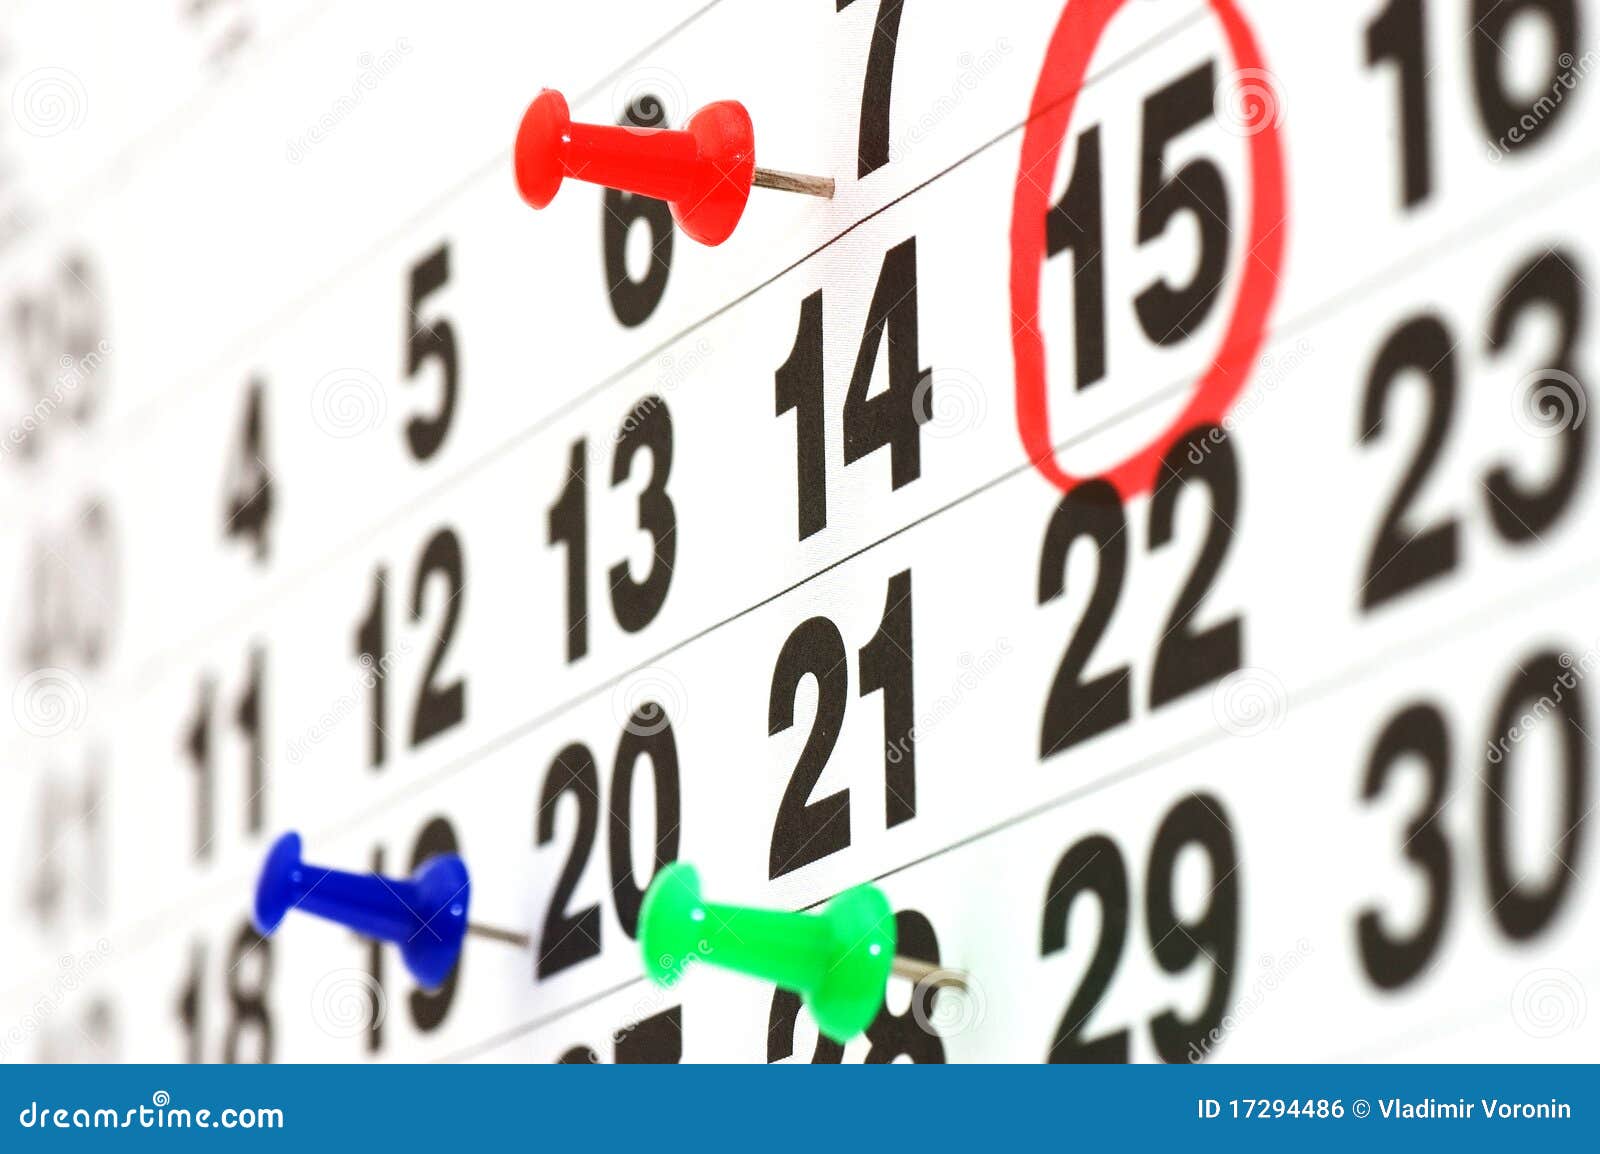 Page of Calendar Showing Date of Today Stock Photo Image of calendar